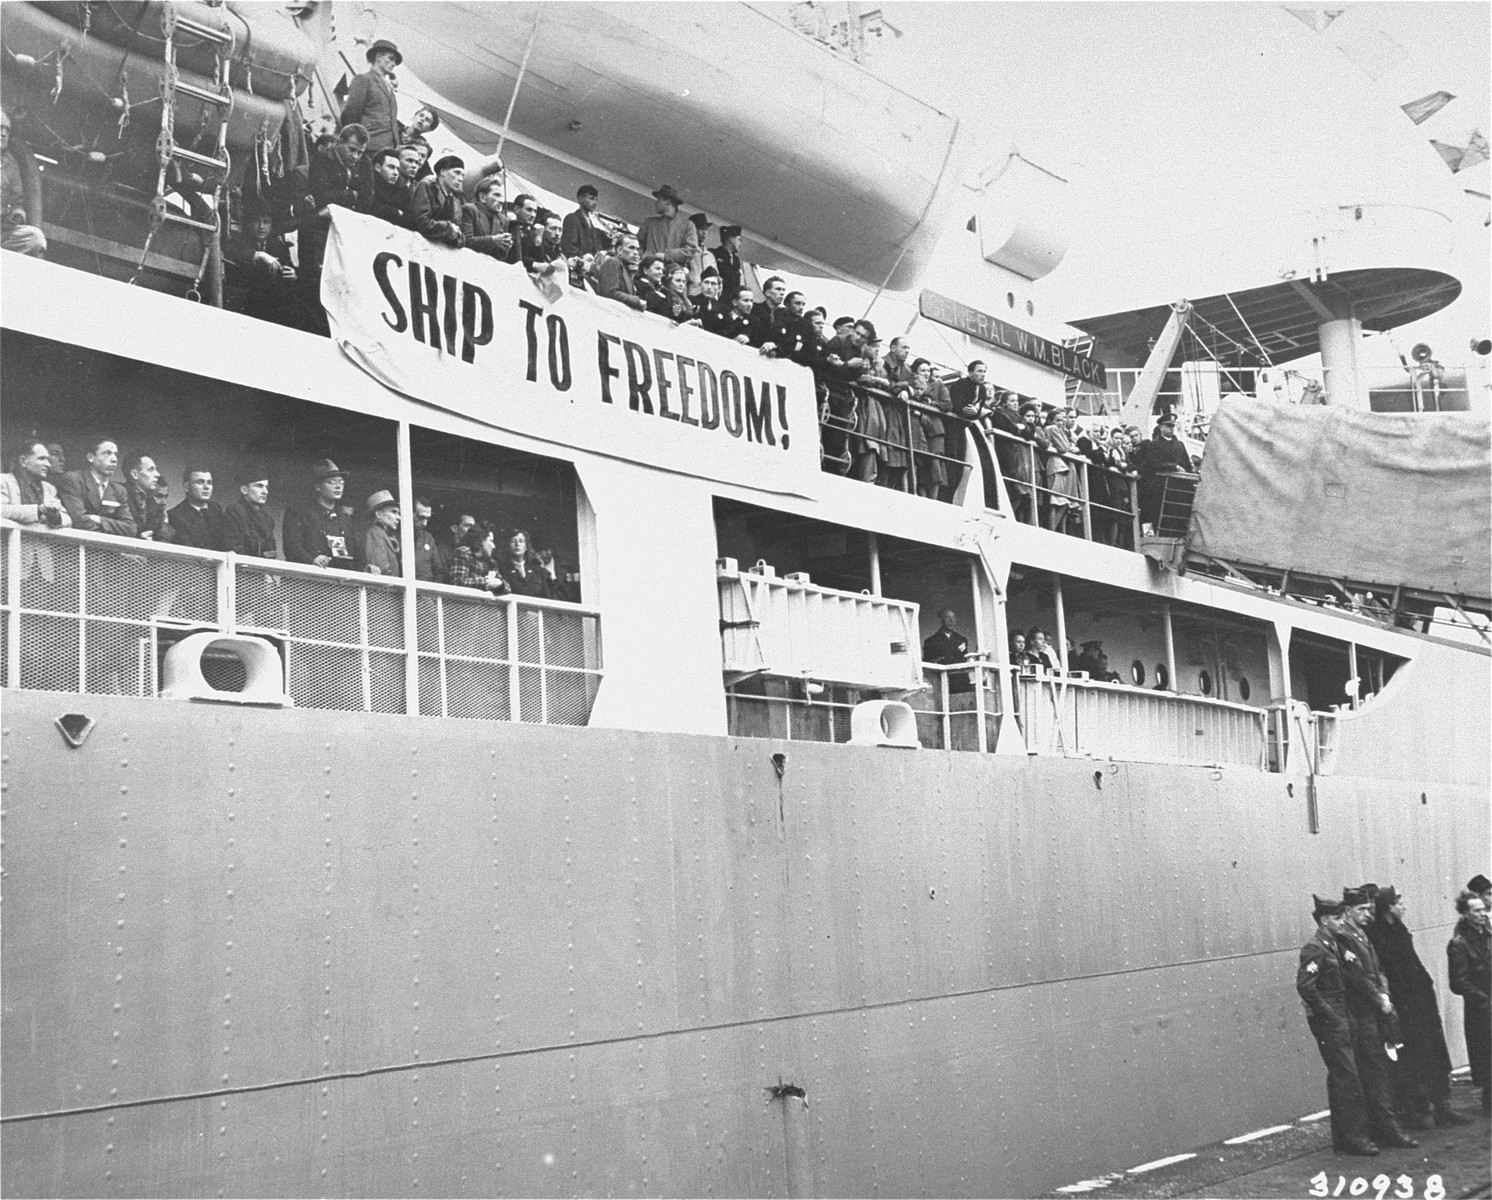 Displaced persons of various nationalities seeking to immigrate to the U.S. line the decks of the General Black as it leaves the port of Bremerhaven.